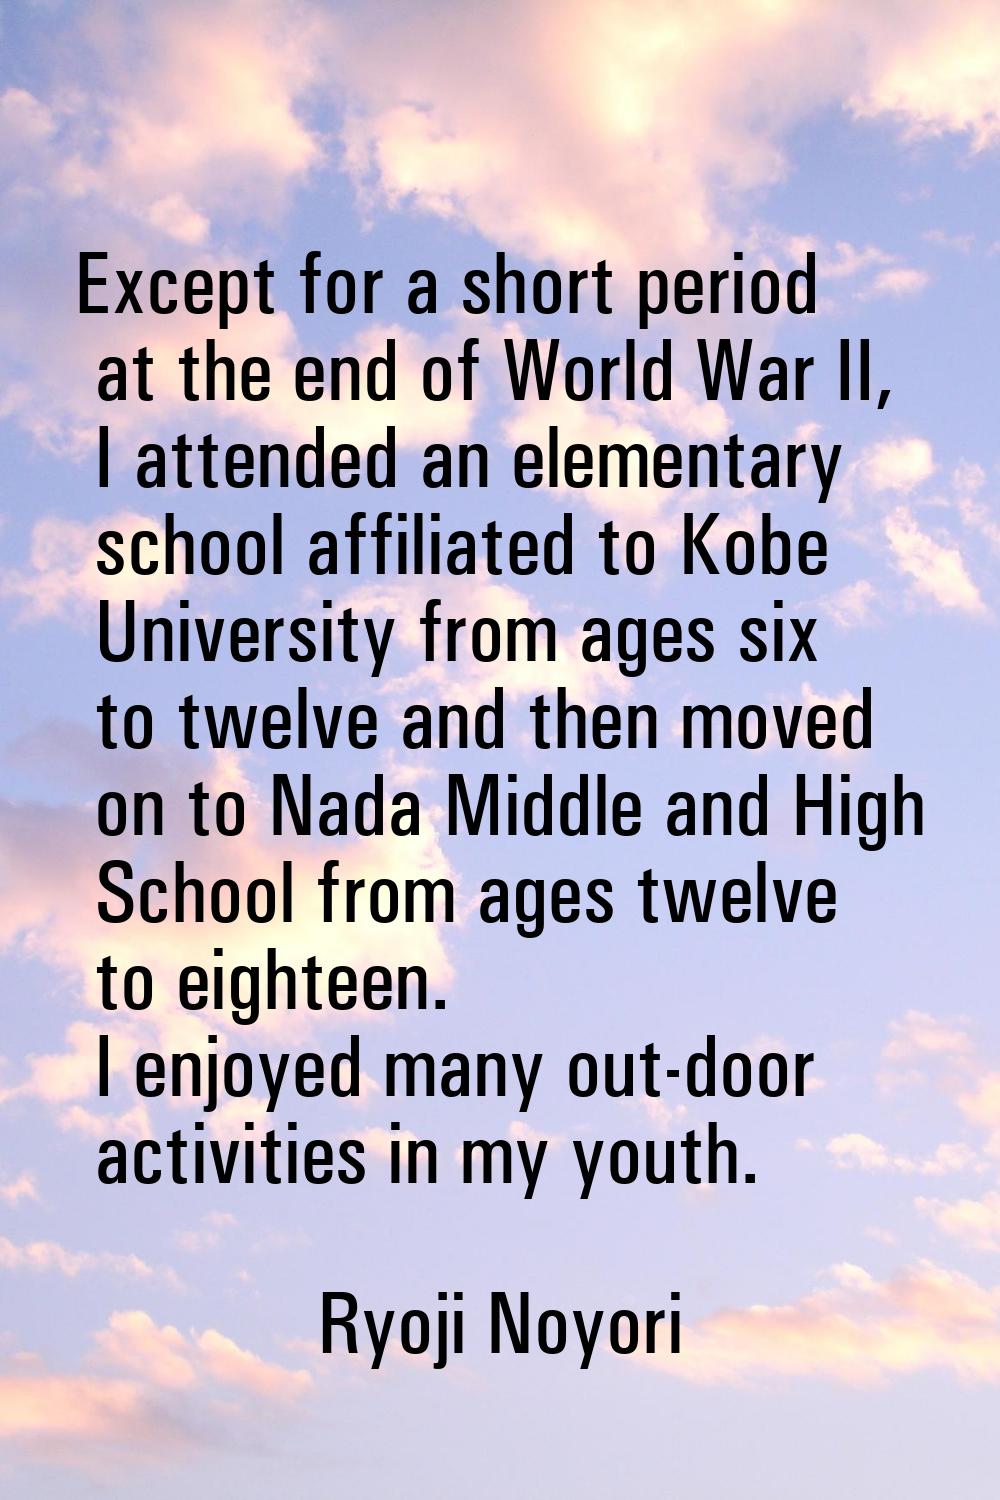 Except for a short period at the end of World War II, I attended an elementary school affiliated to